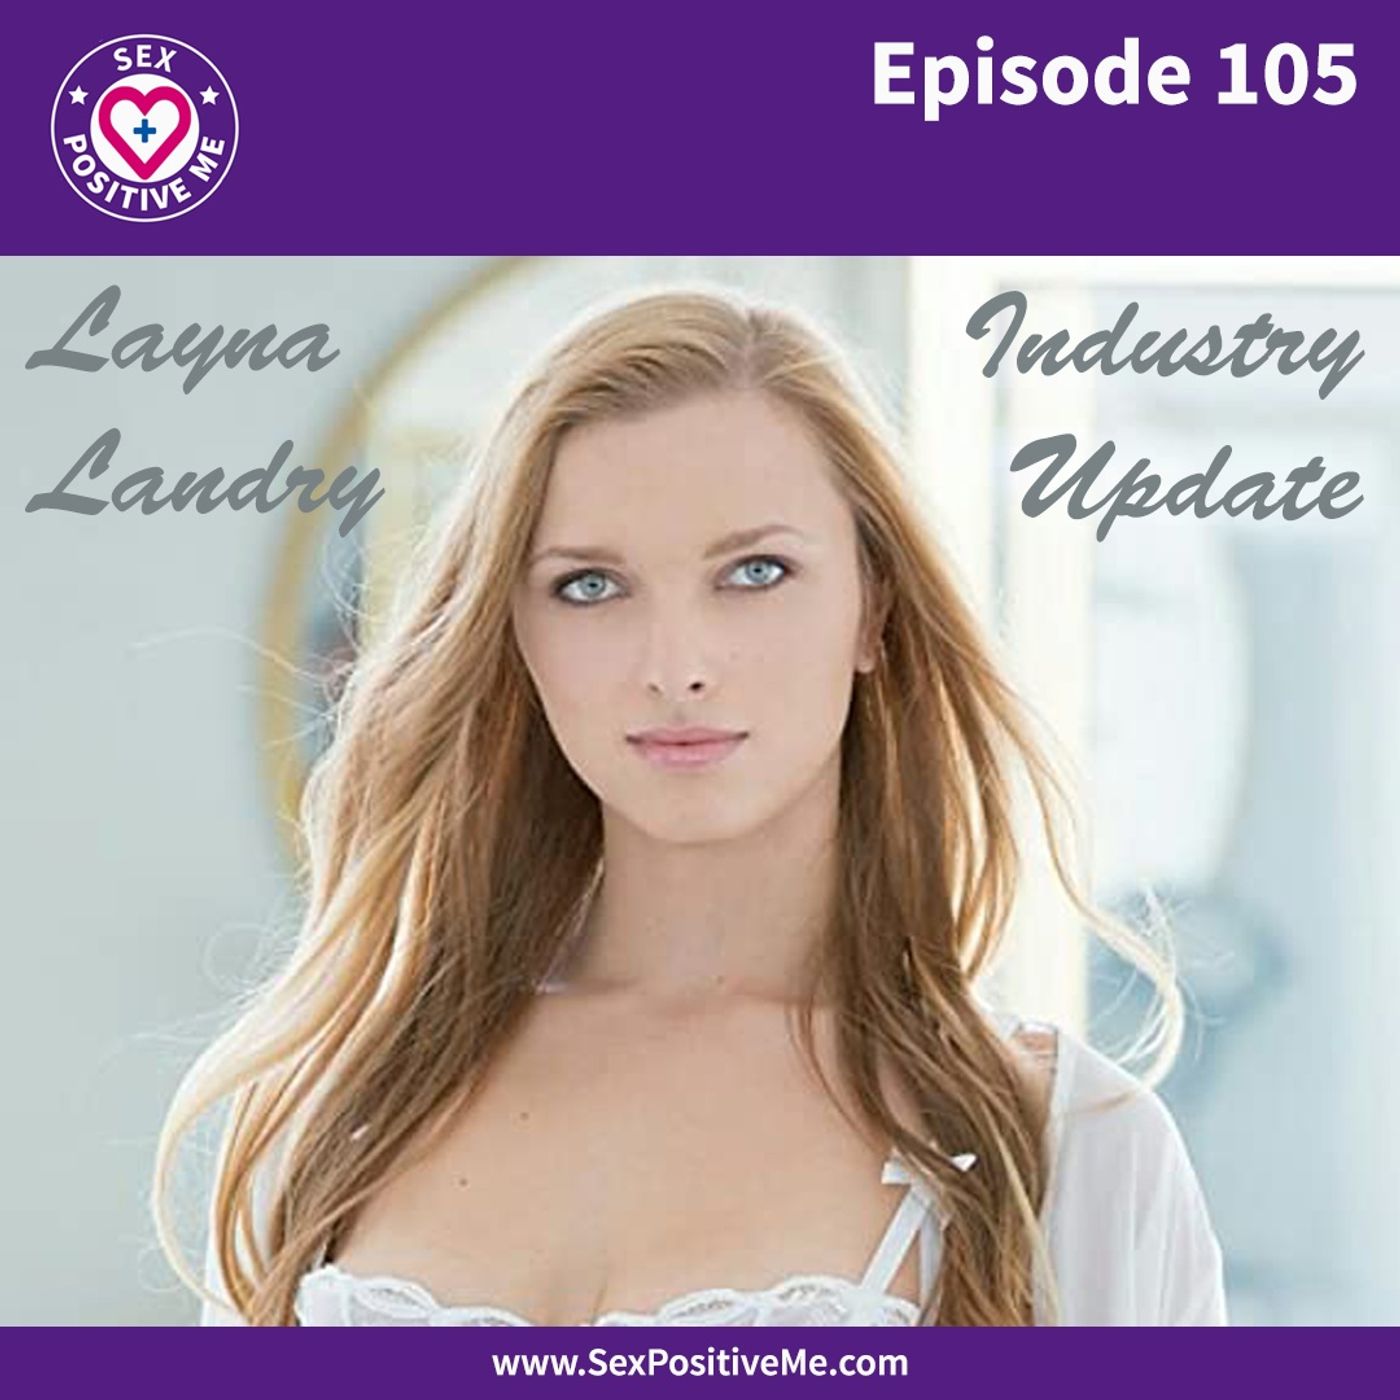 Sex Positive Me - E105: Industry Update with Layna Landry